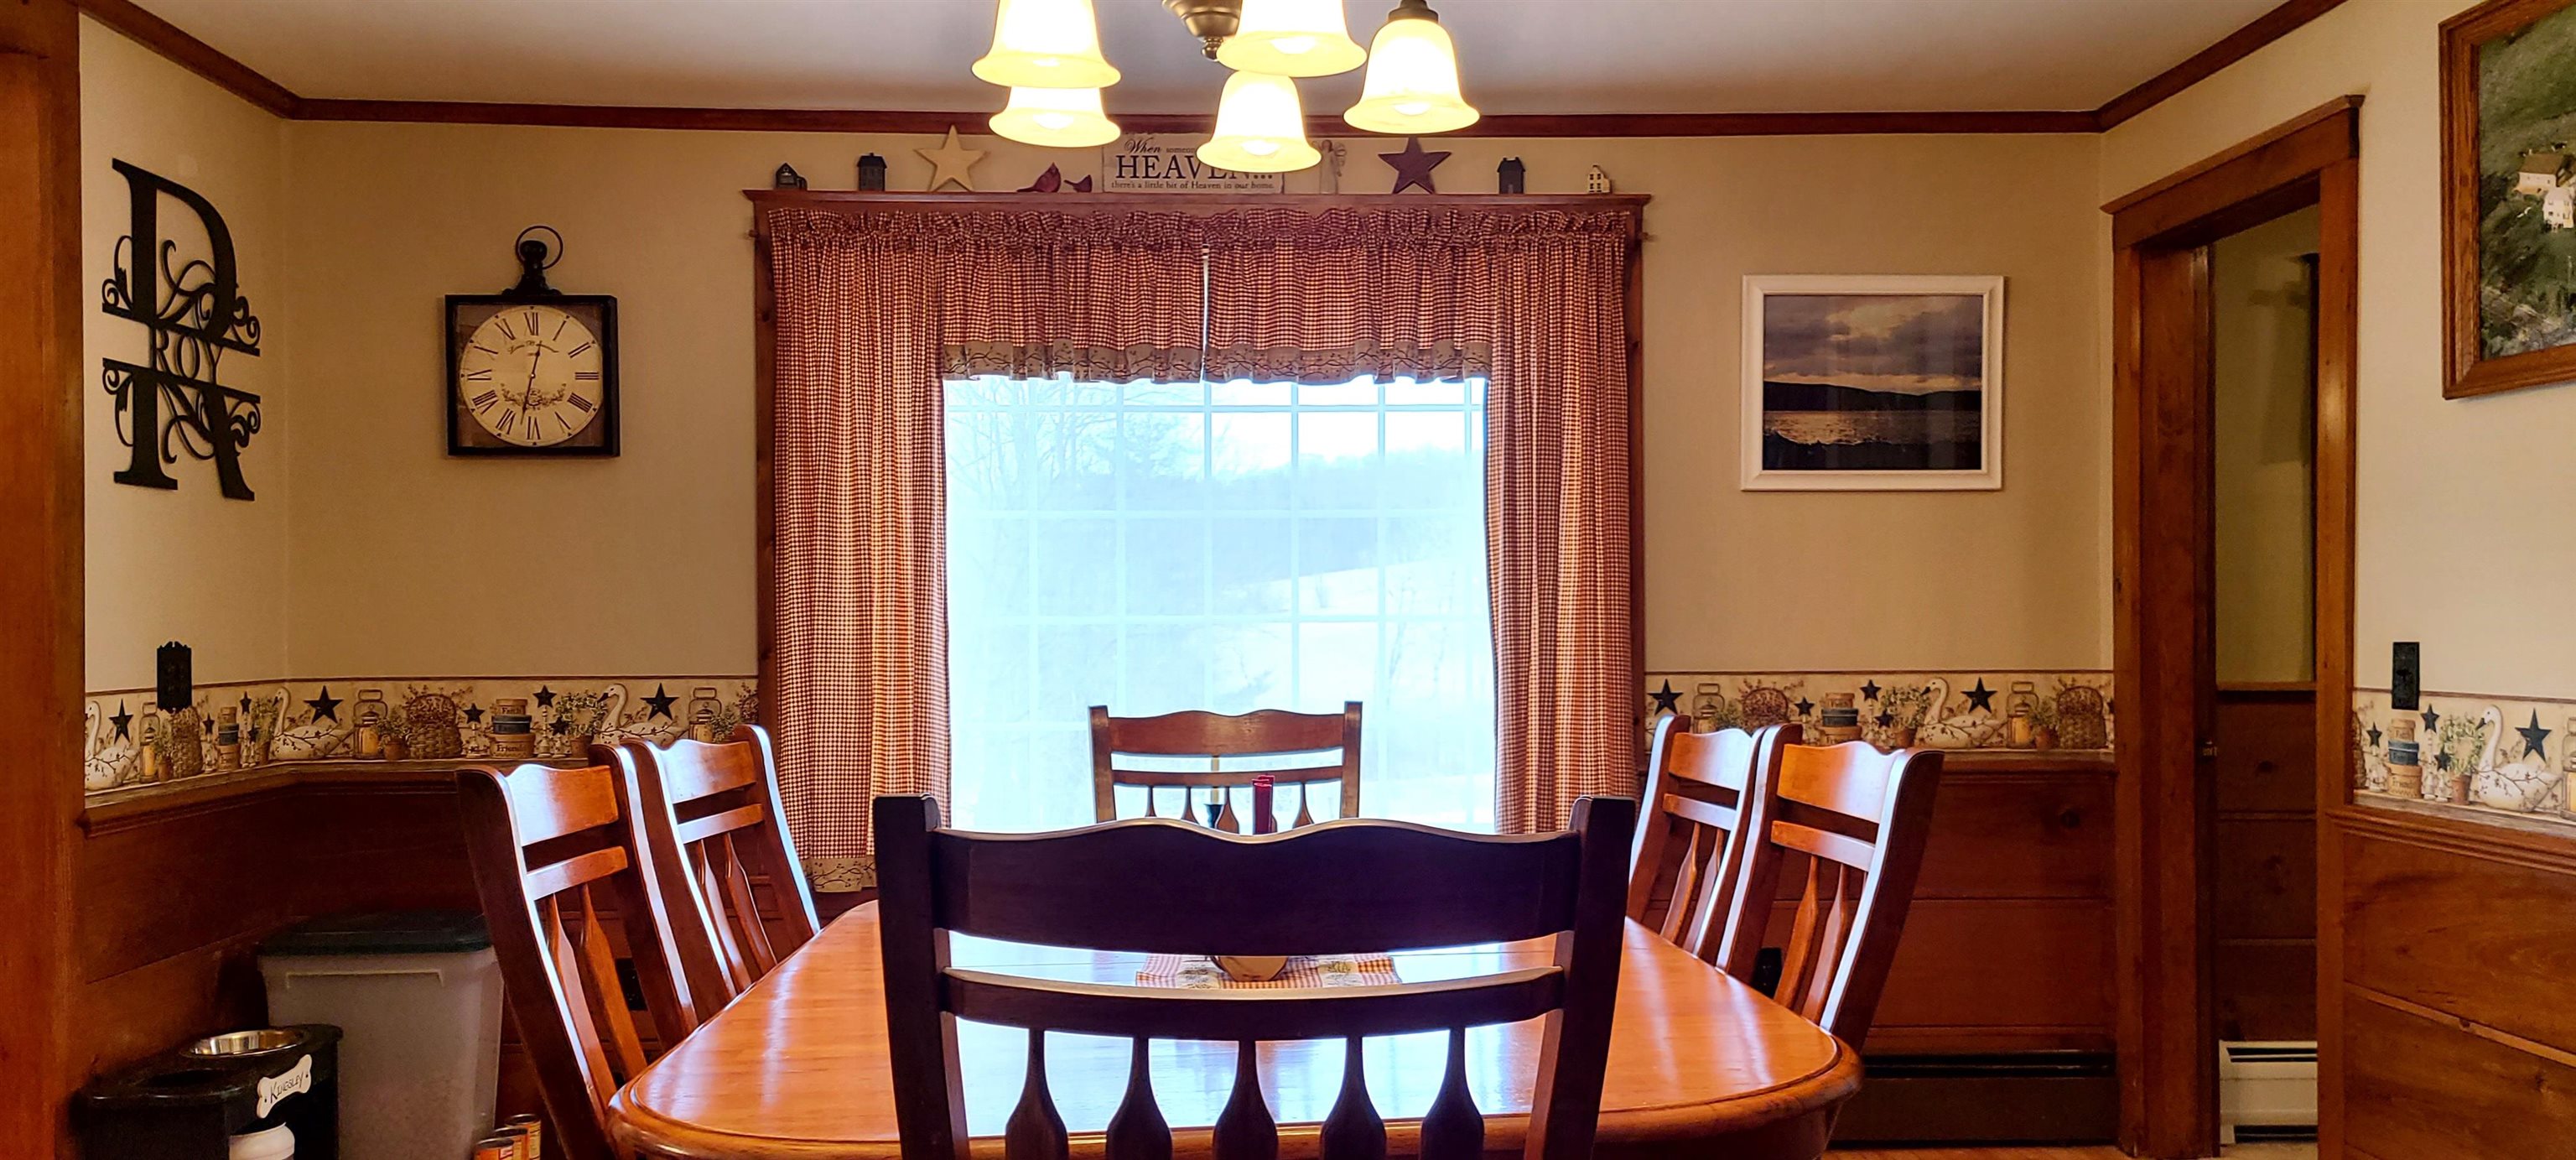 Room for 12 in this dining room